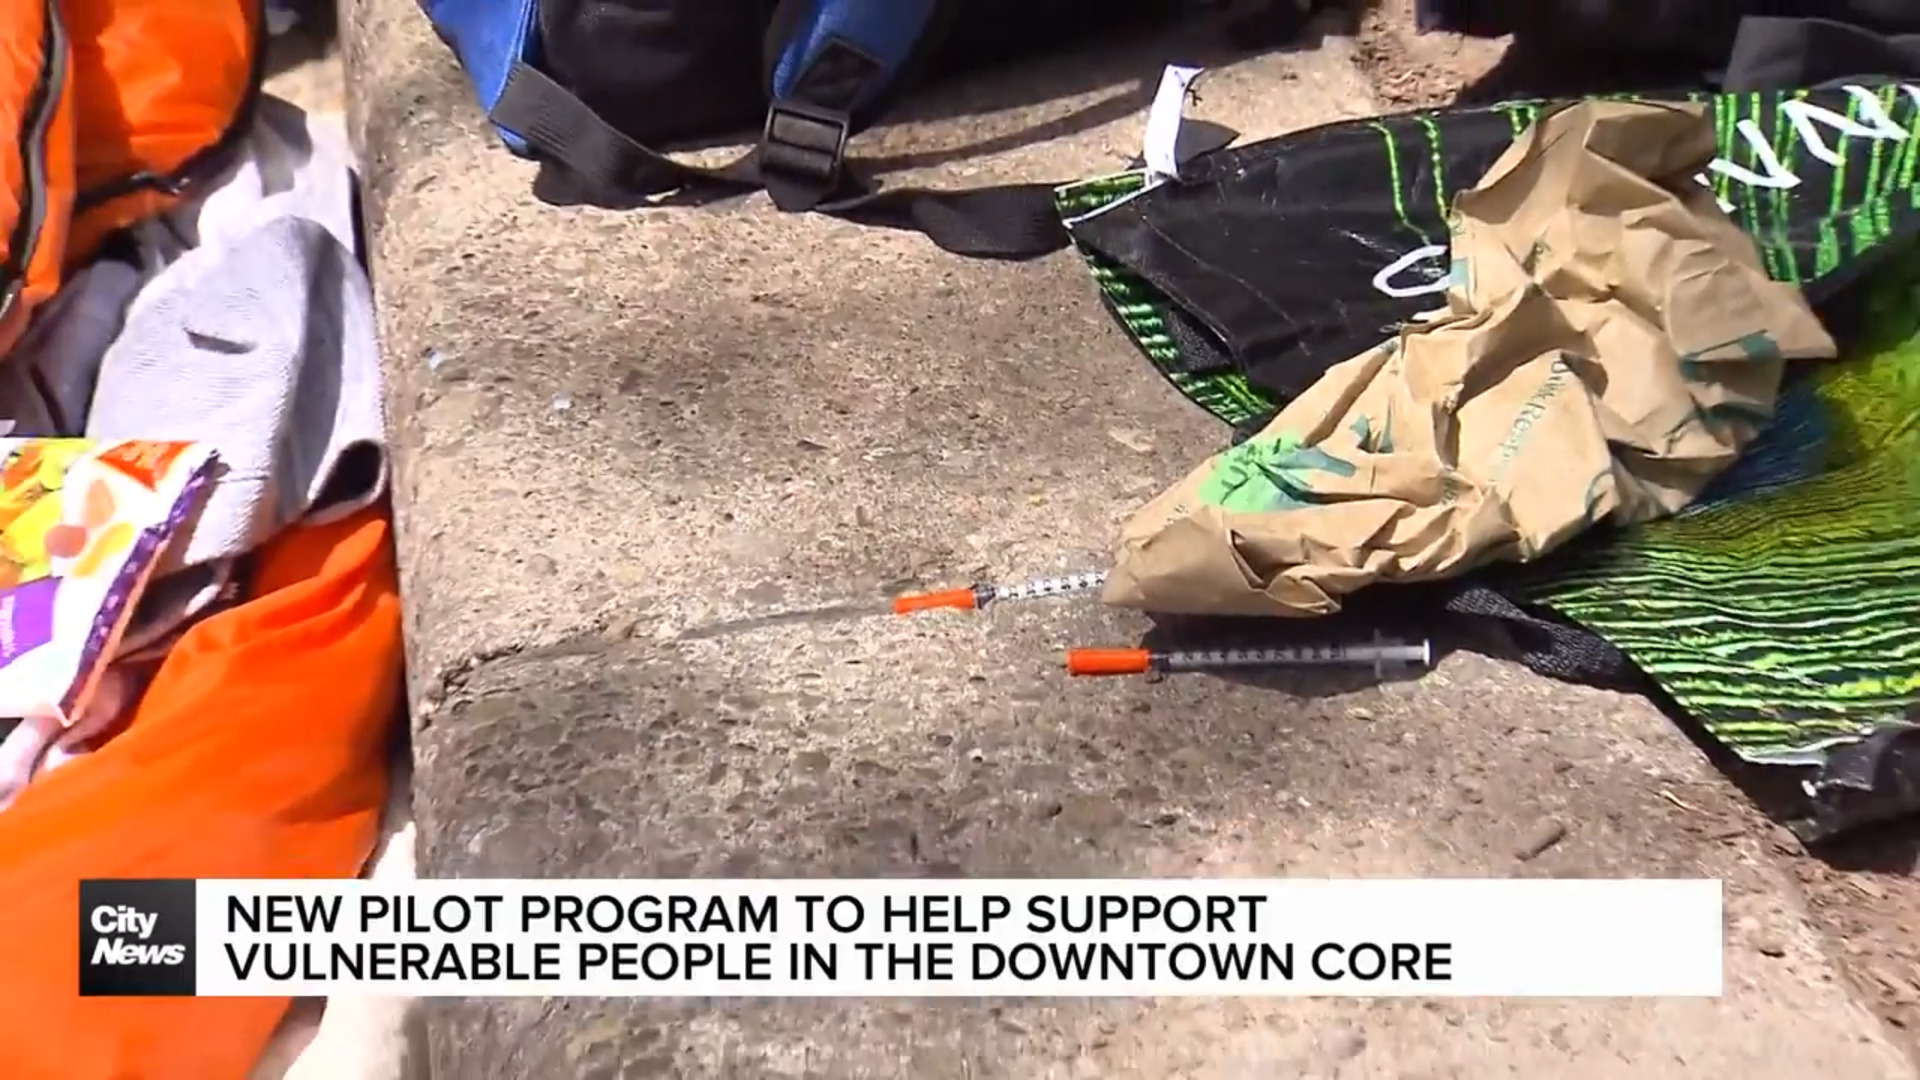 New pilot program aims to support vulnerable people downtown